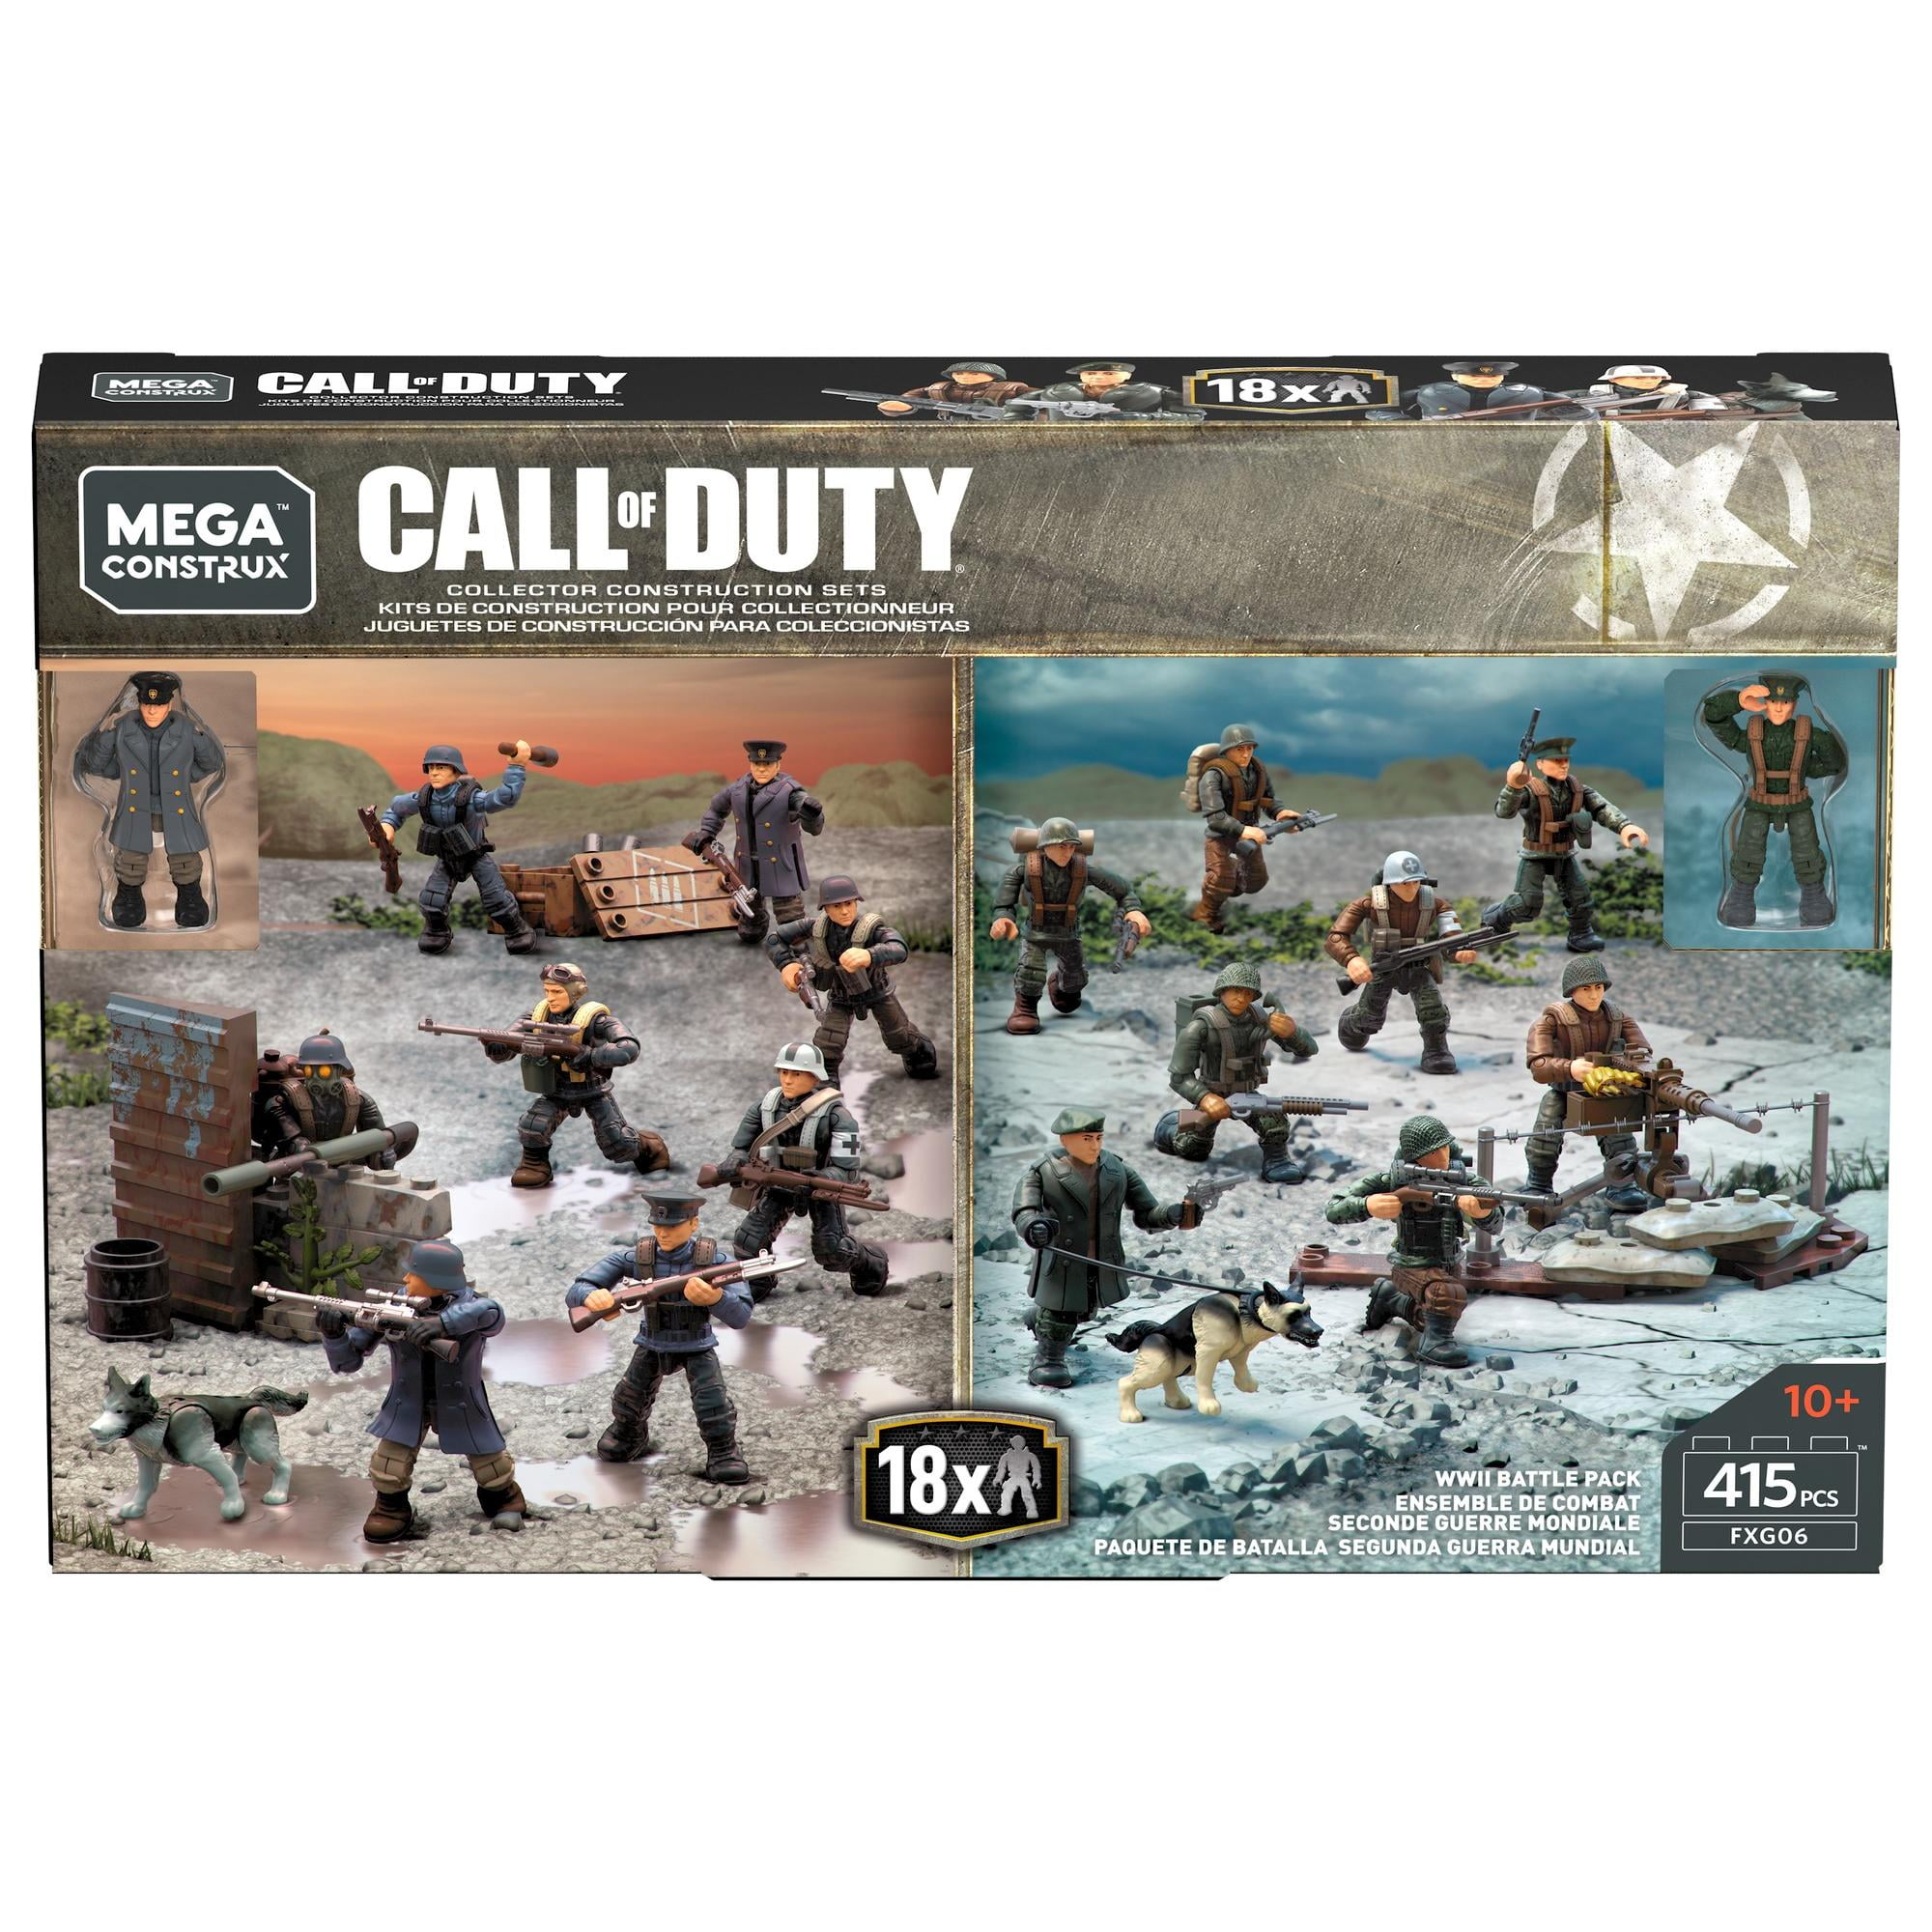 Details about   Call of Duty Mega Construx  WWII Battle Pack Legend rare FXG06 New 